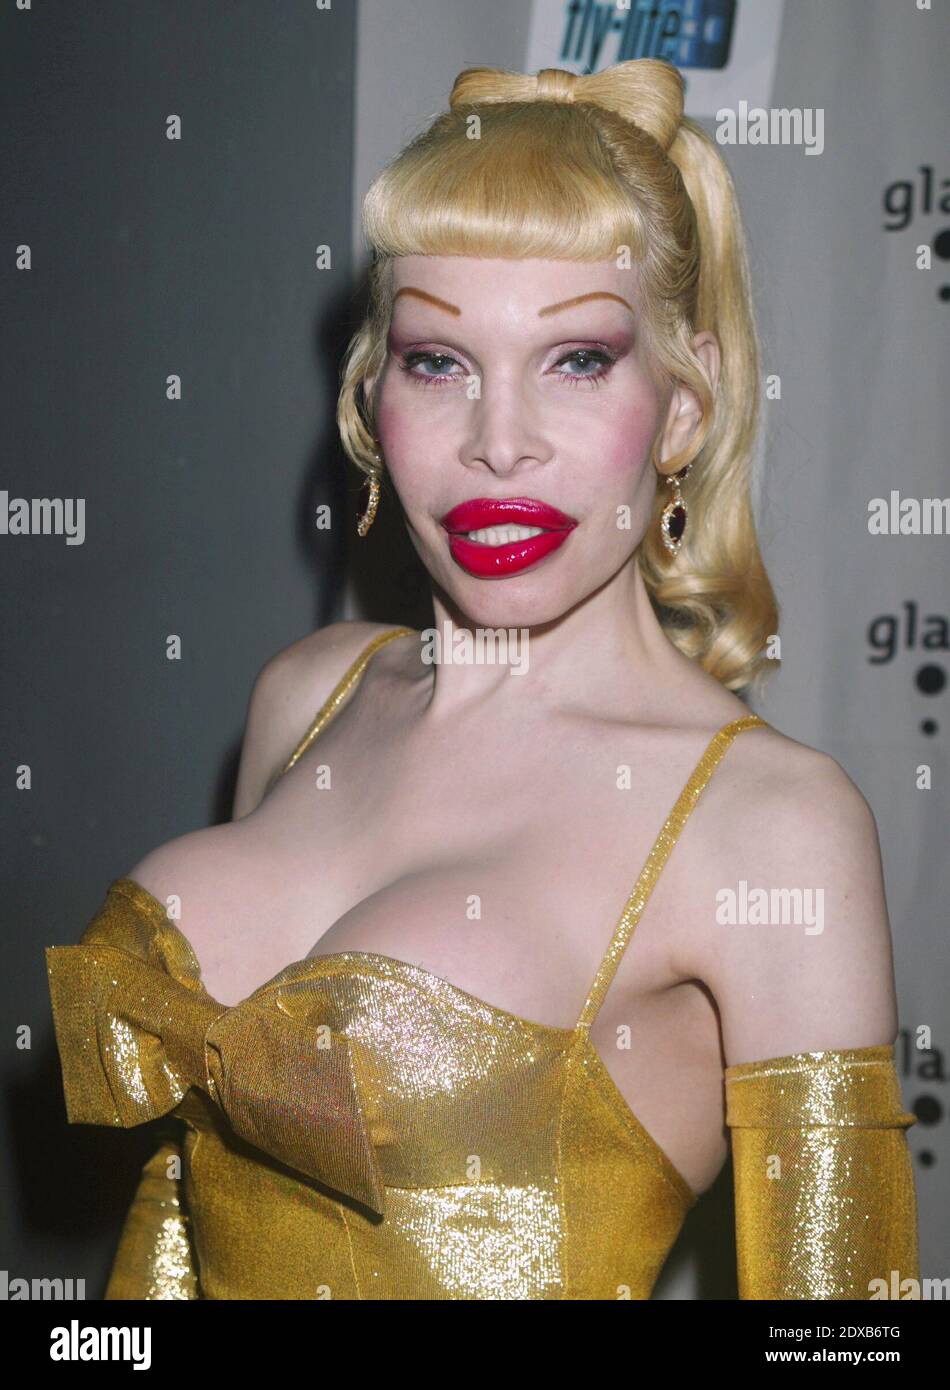 Amanda Lepore at 'The Real Thing' benefit for GLAAD at The Roxy in New York City on May 8, 2003.  Photo Credit: Henry McGee/MediaPunch Stock Photo